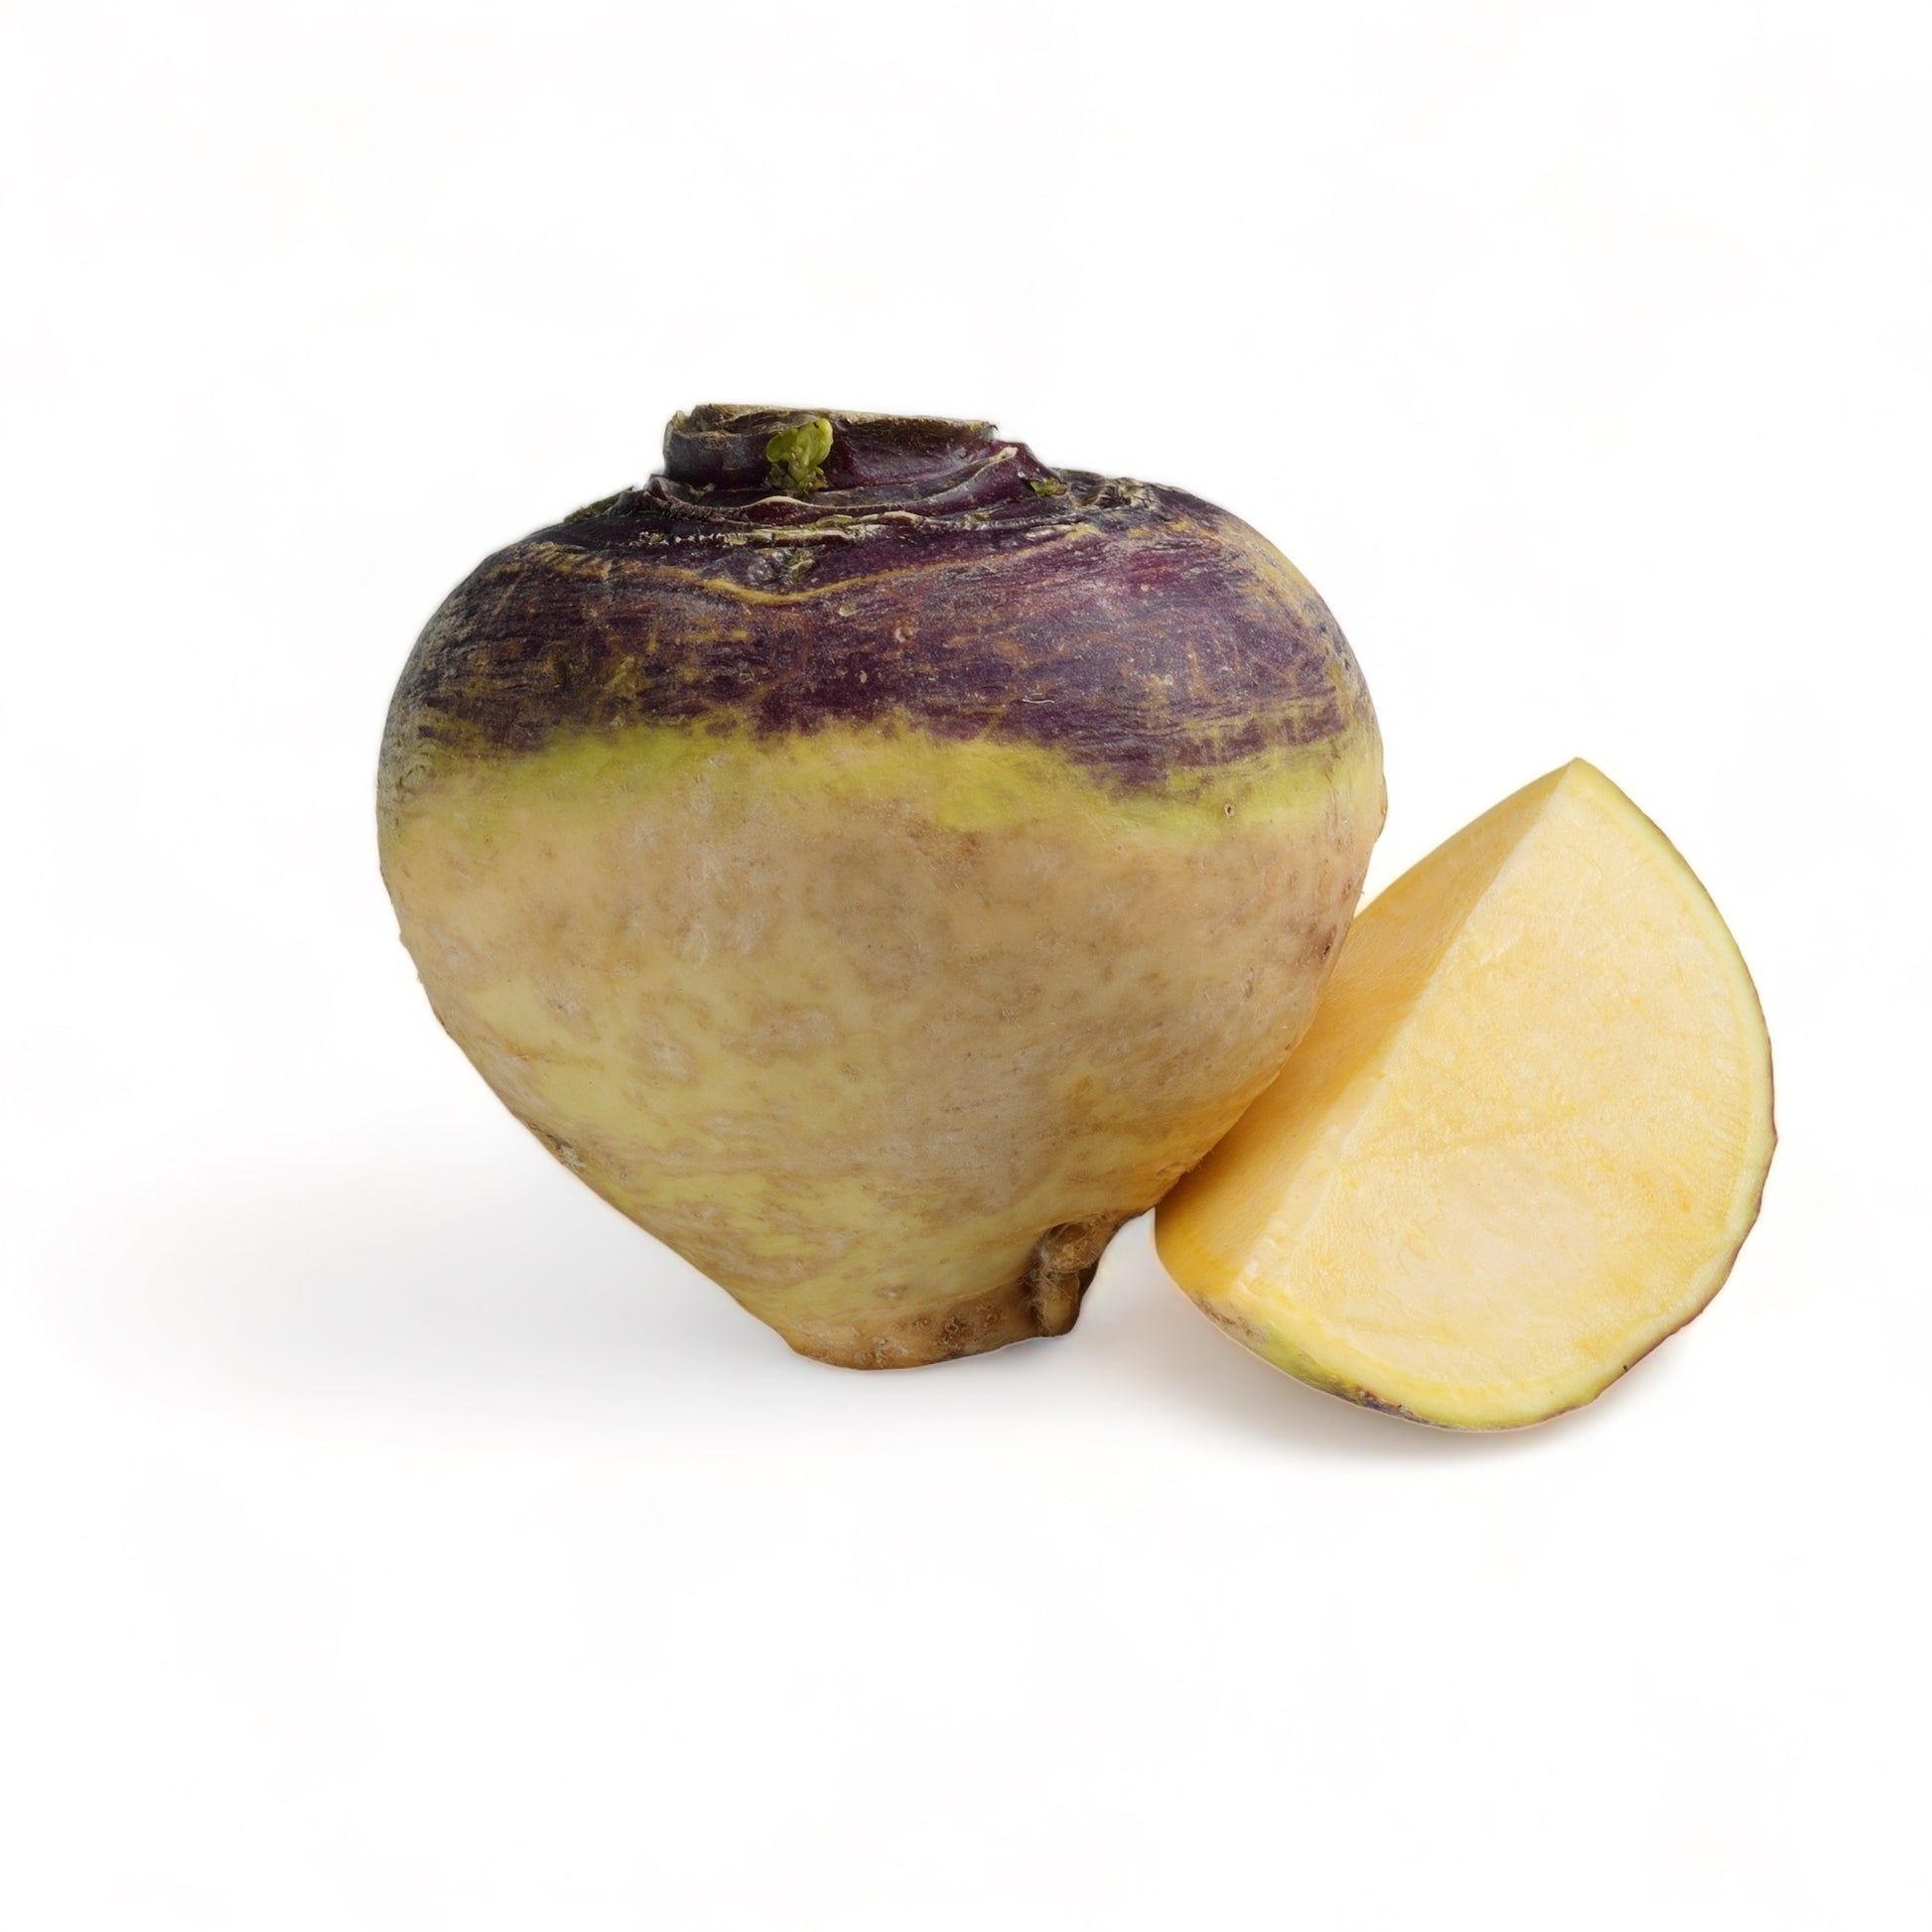 Fully grown bulb of American Purple Top Rutabaga whole and sliced on a surface